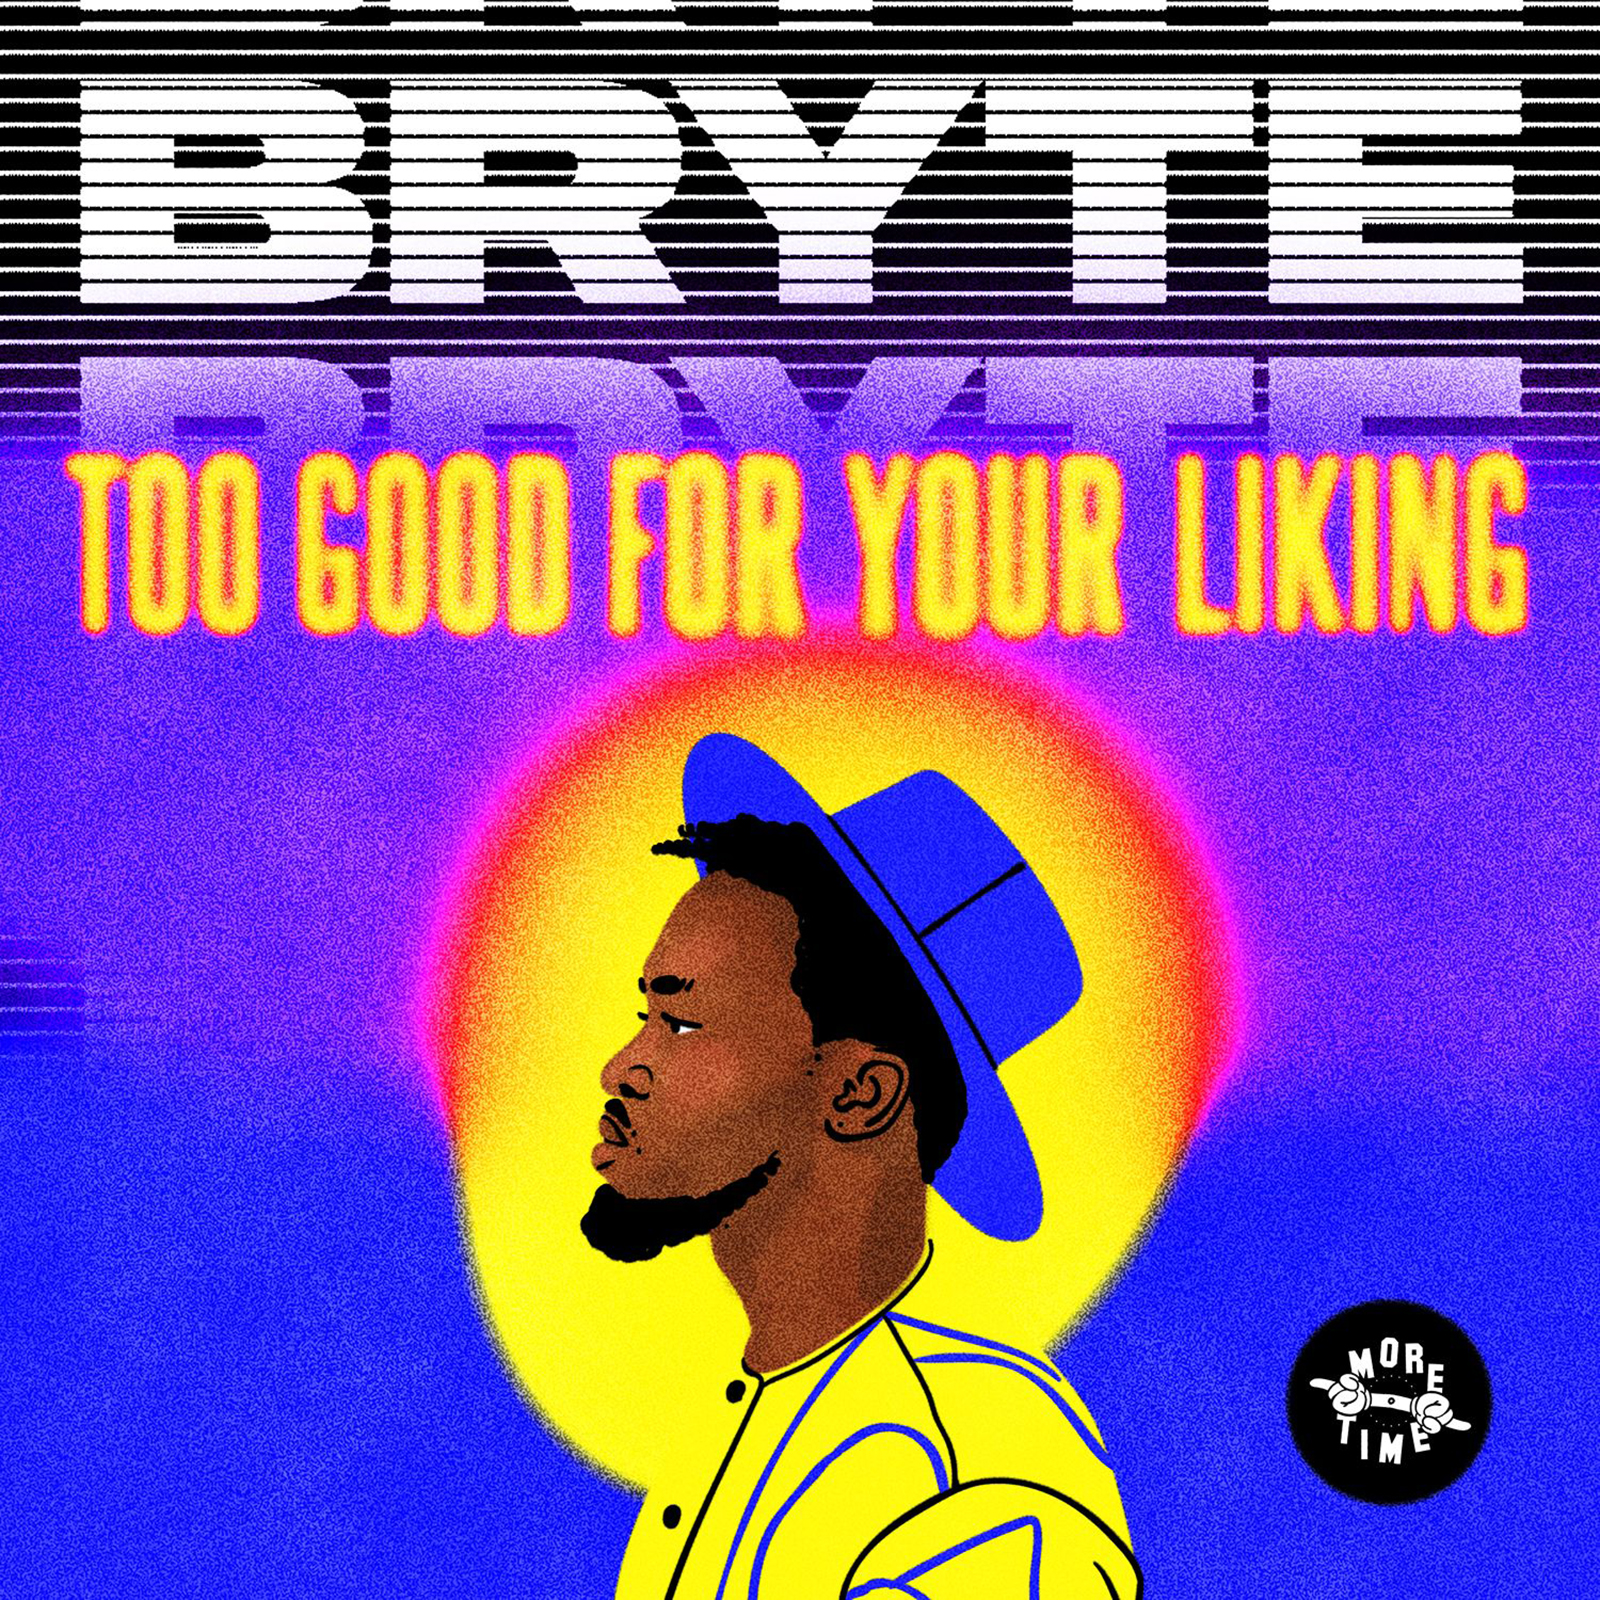 Too Good For Your Liking Album by Bryte